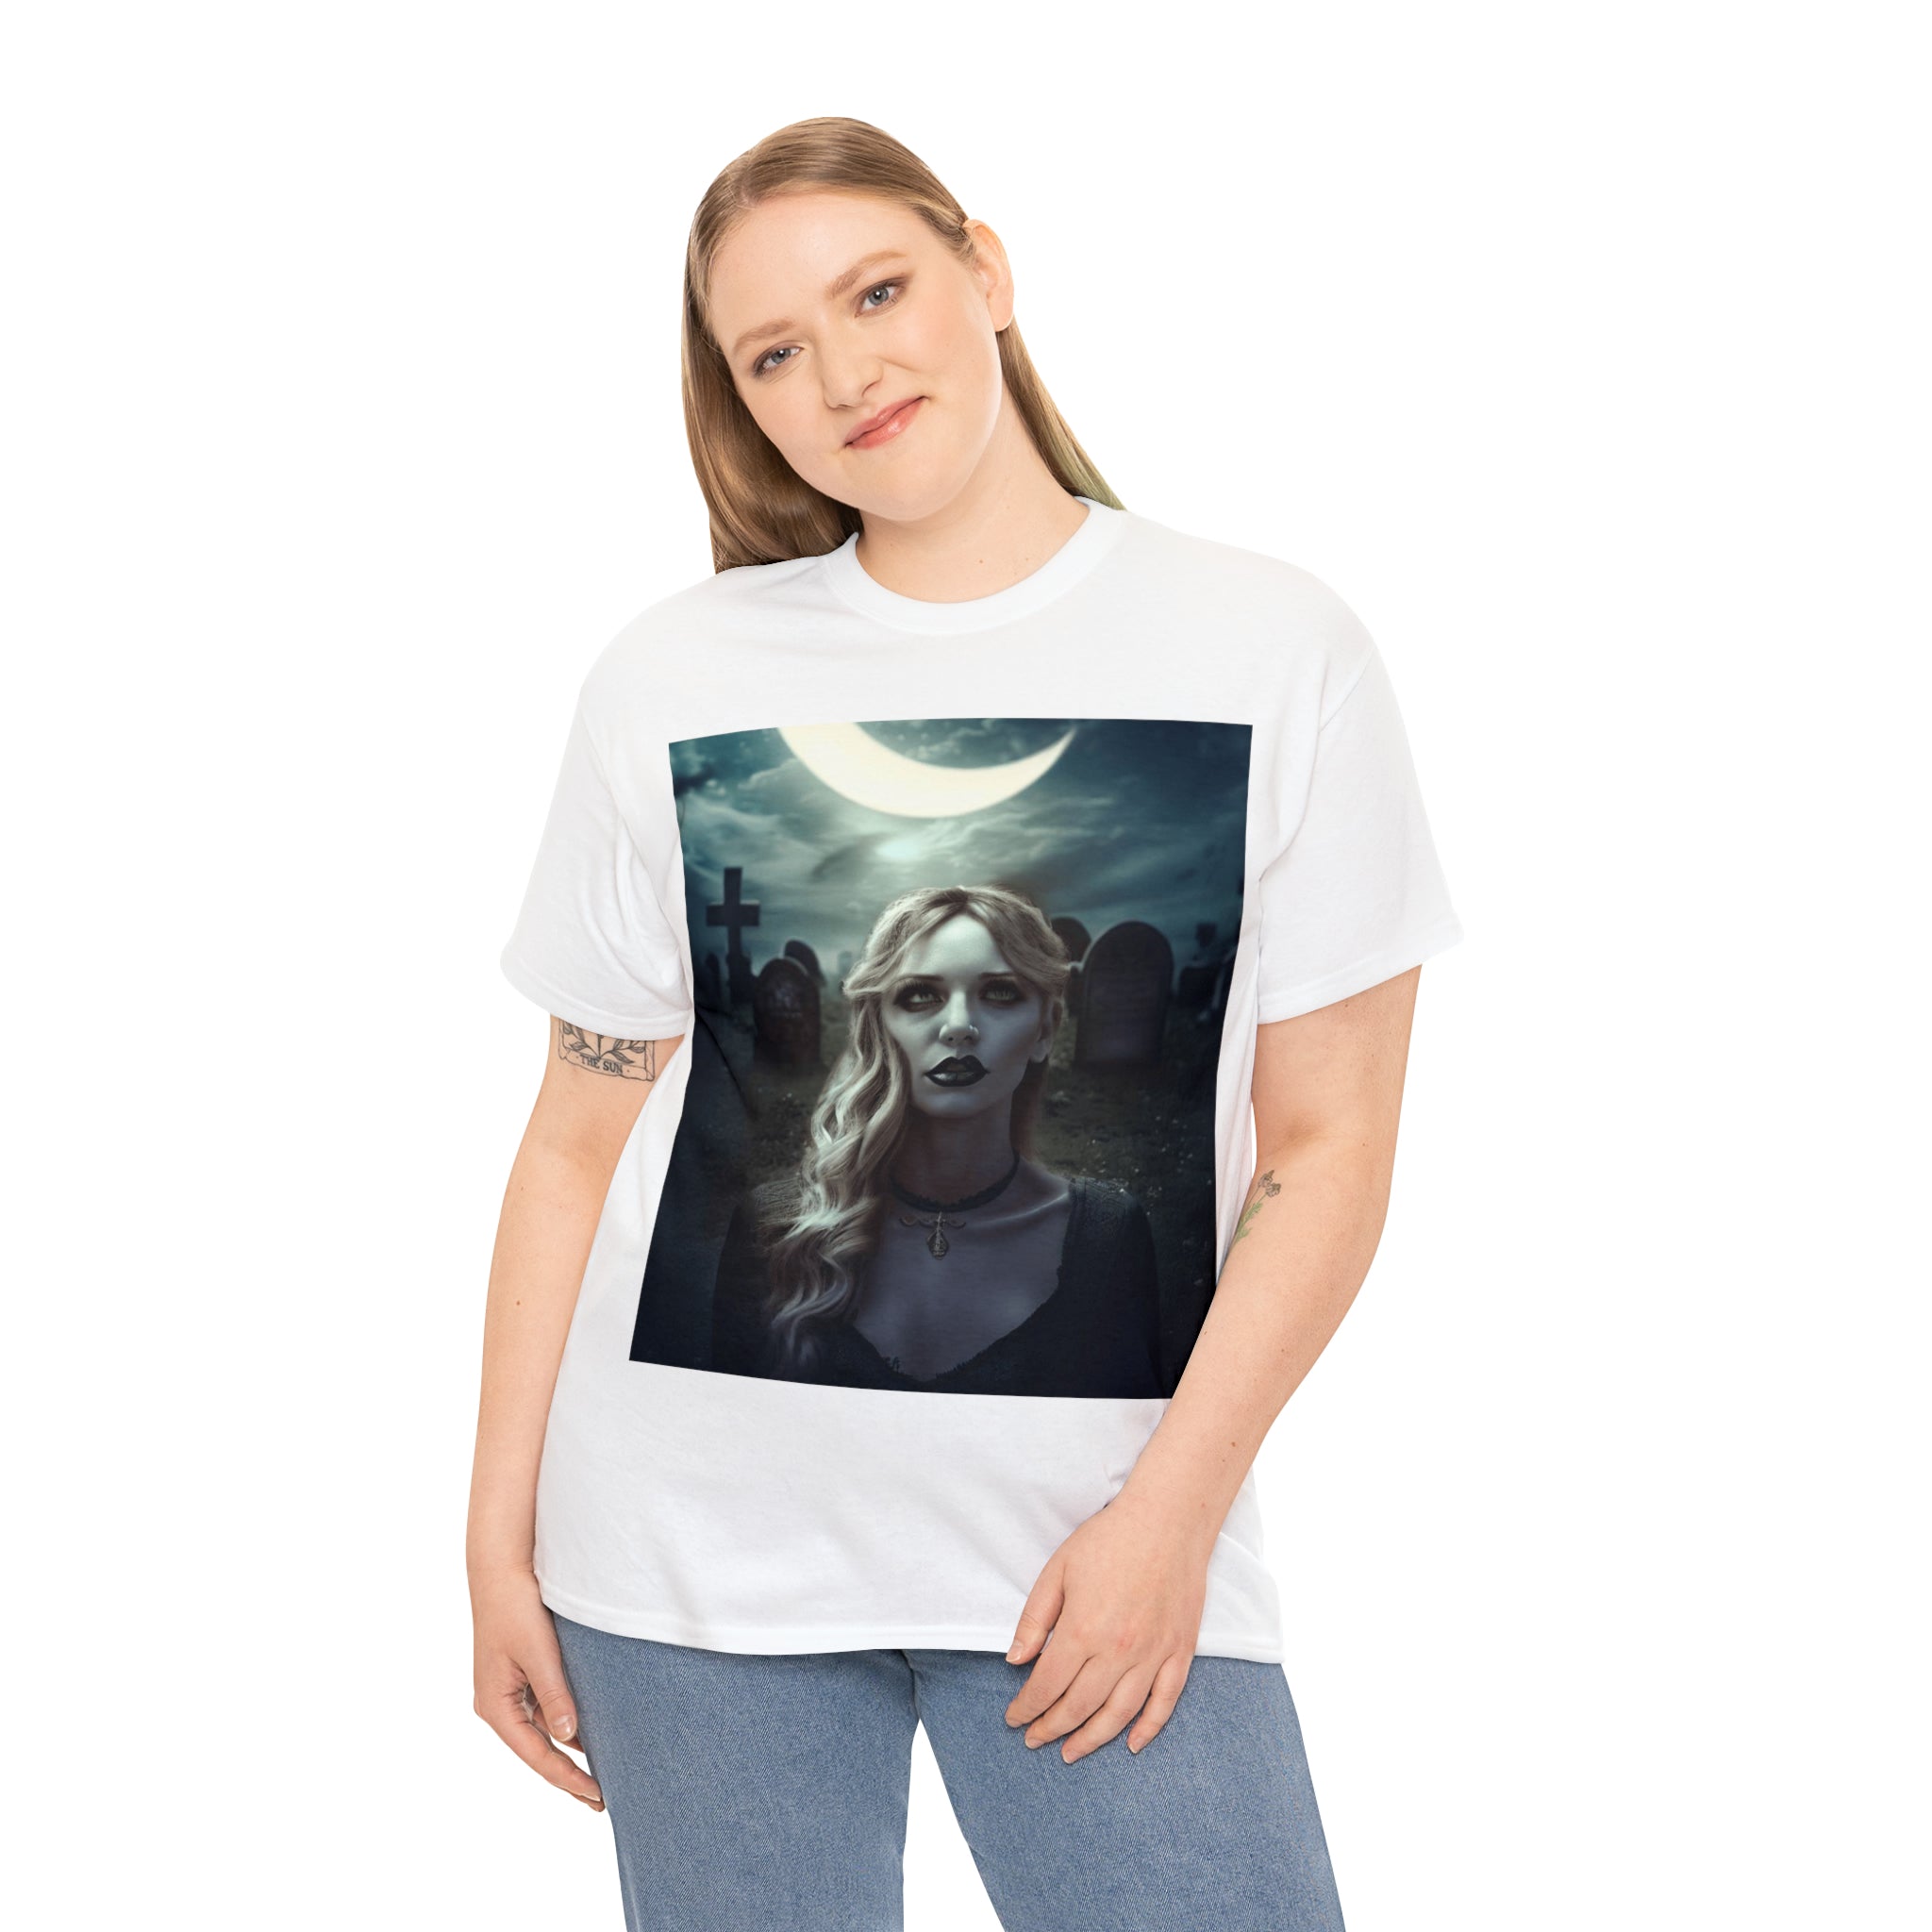 Gothic dark fantasy woman t shirt in graveyard for men and woman